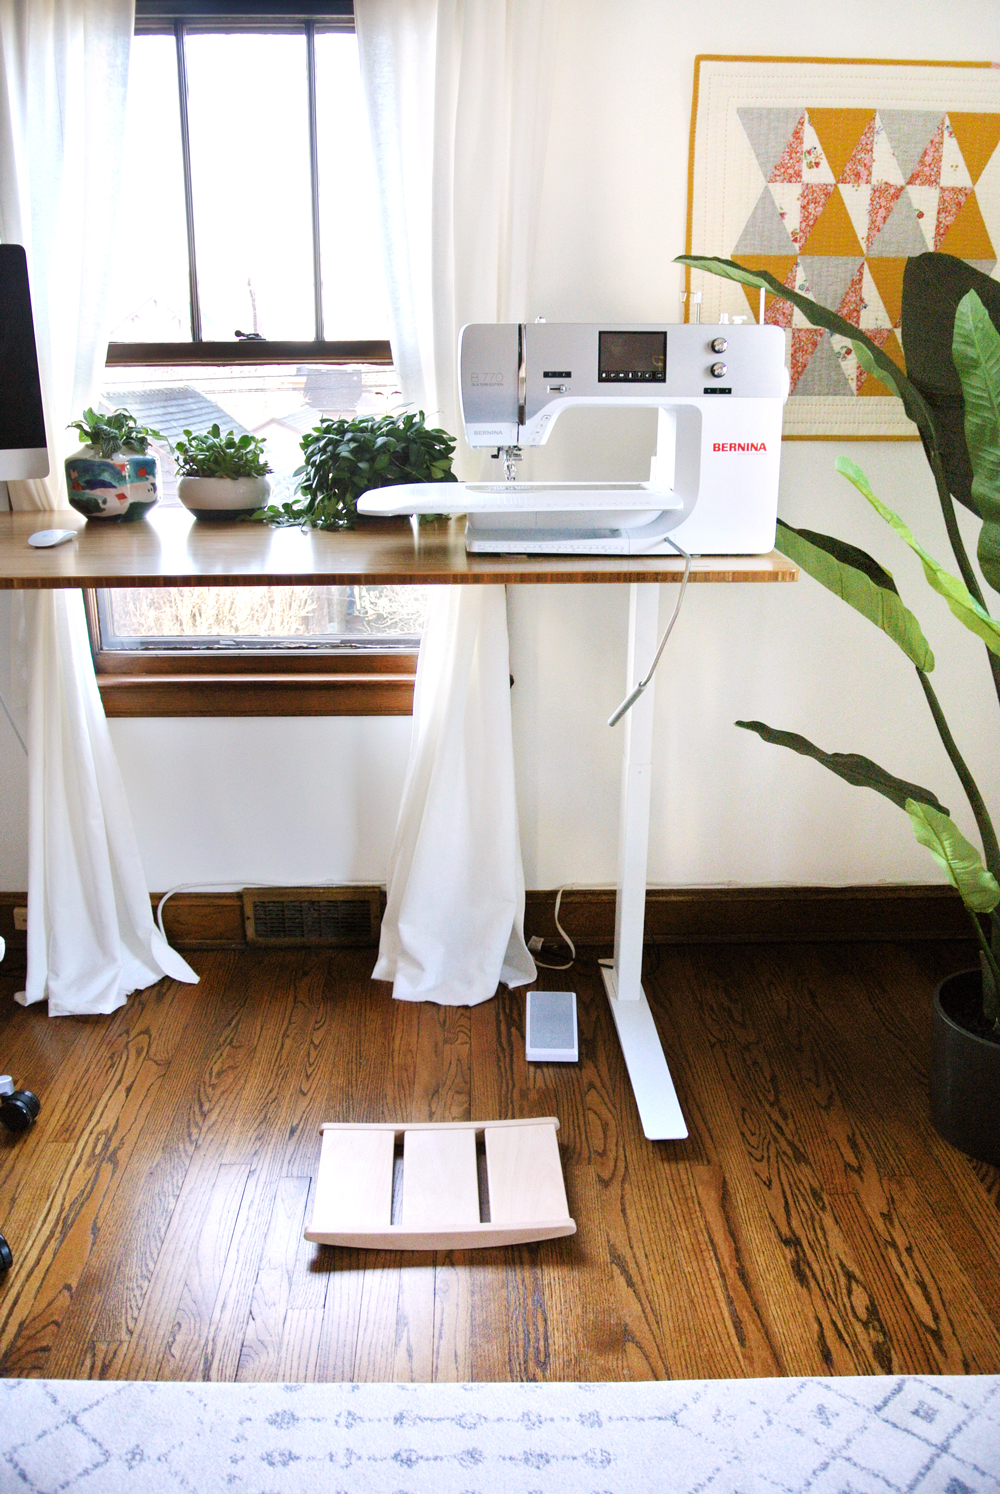 A tour of the Suzy Quilts studio with the New and Improved Standing Desk! Standing Desk Sewing Studio by Suzy Quilts https://suzyquilts.com/standing-desk-sewing-studio